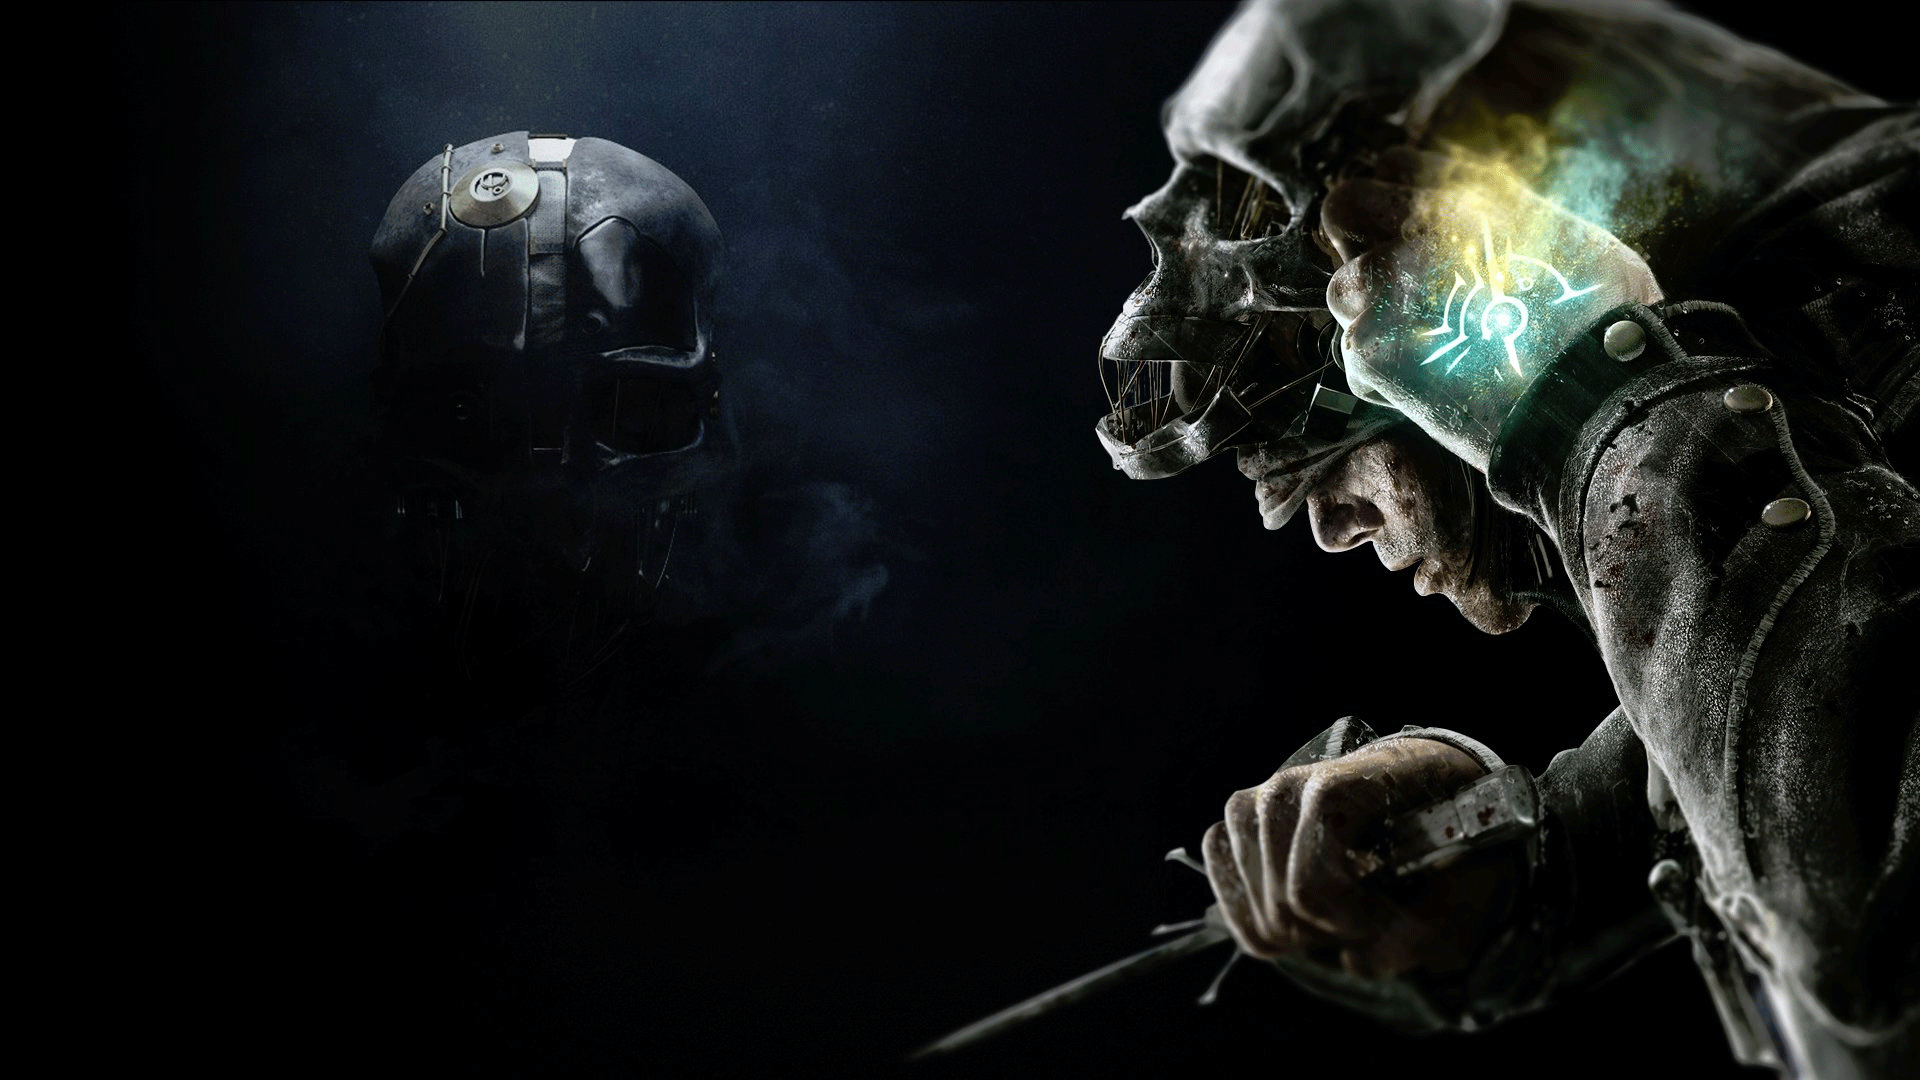 Amazing Dishonored 2 Wallpaper Full HD Pictures 1920x1080